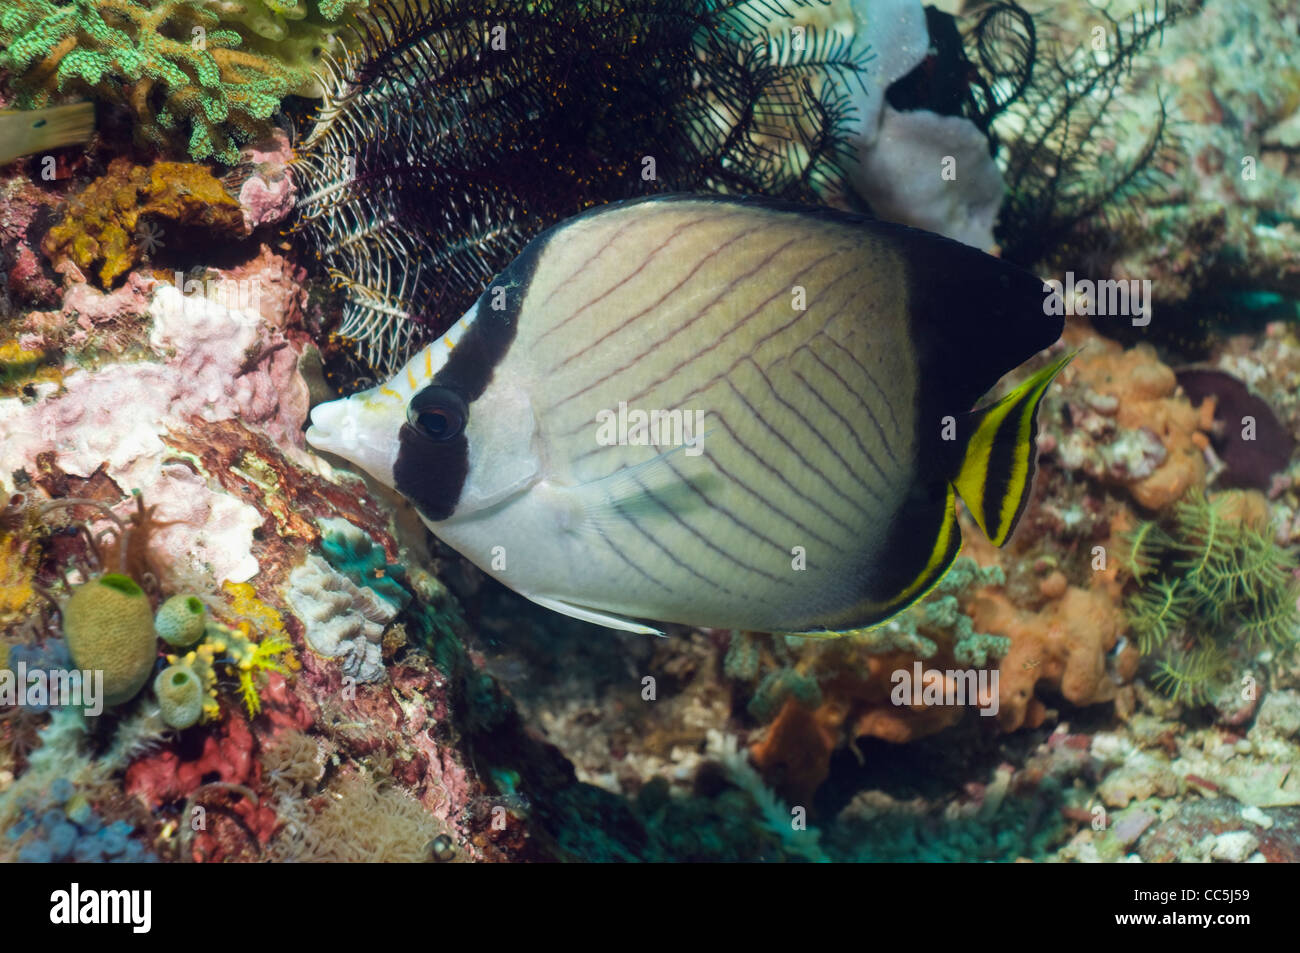 Indian vagabond butterflyfish (Chaetodon decussatus) with a black coral bush. Komodo NP, Indonesia. Stock Photo